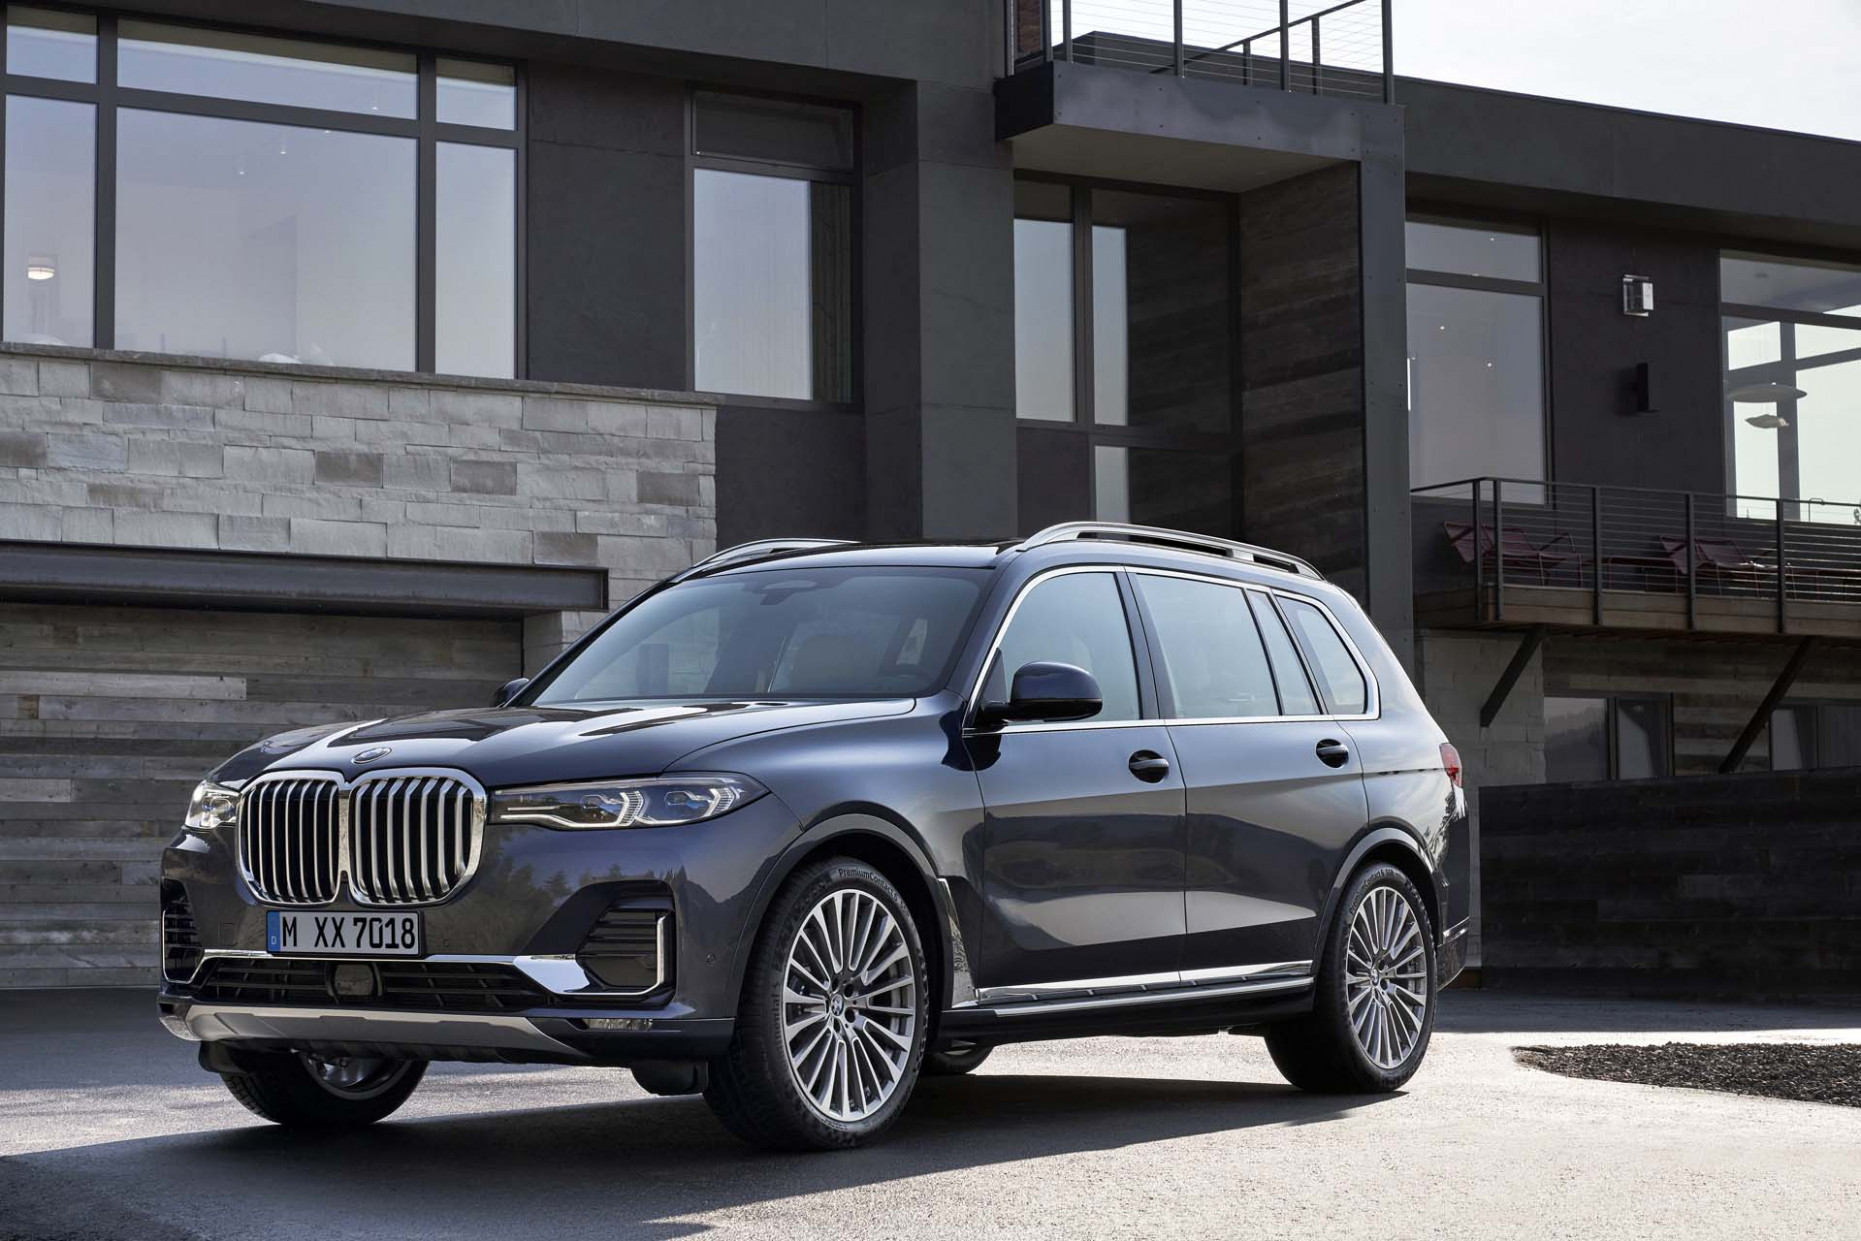 Price, Design and Review length of bmw x7